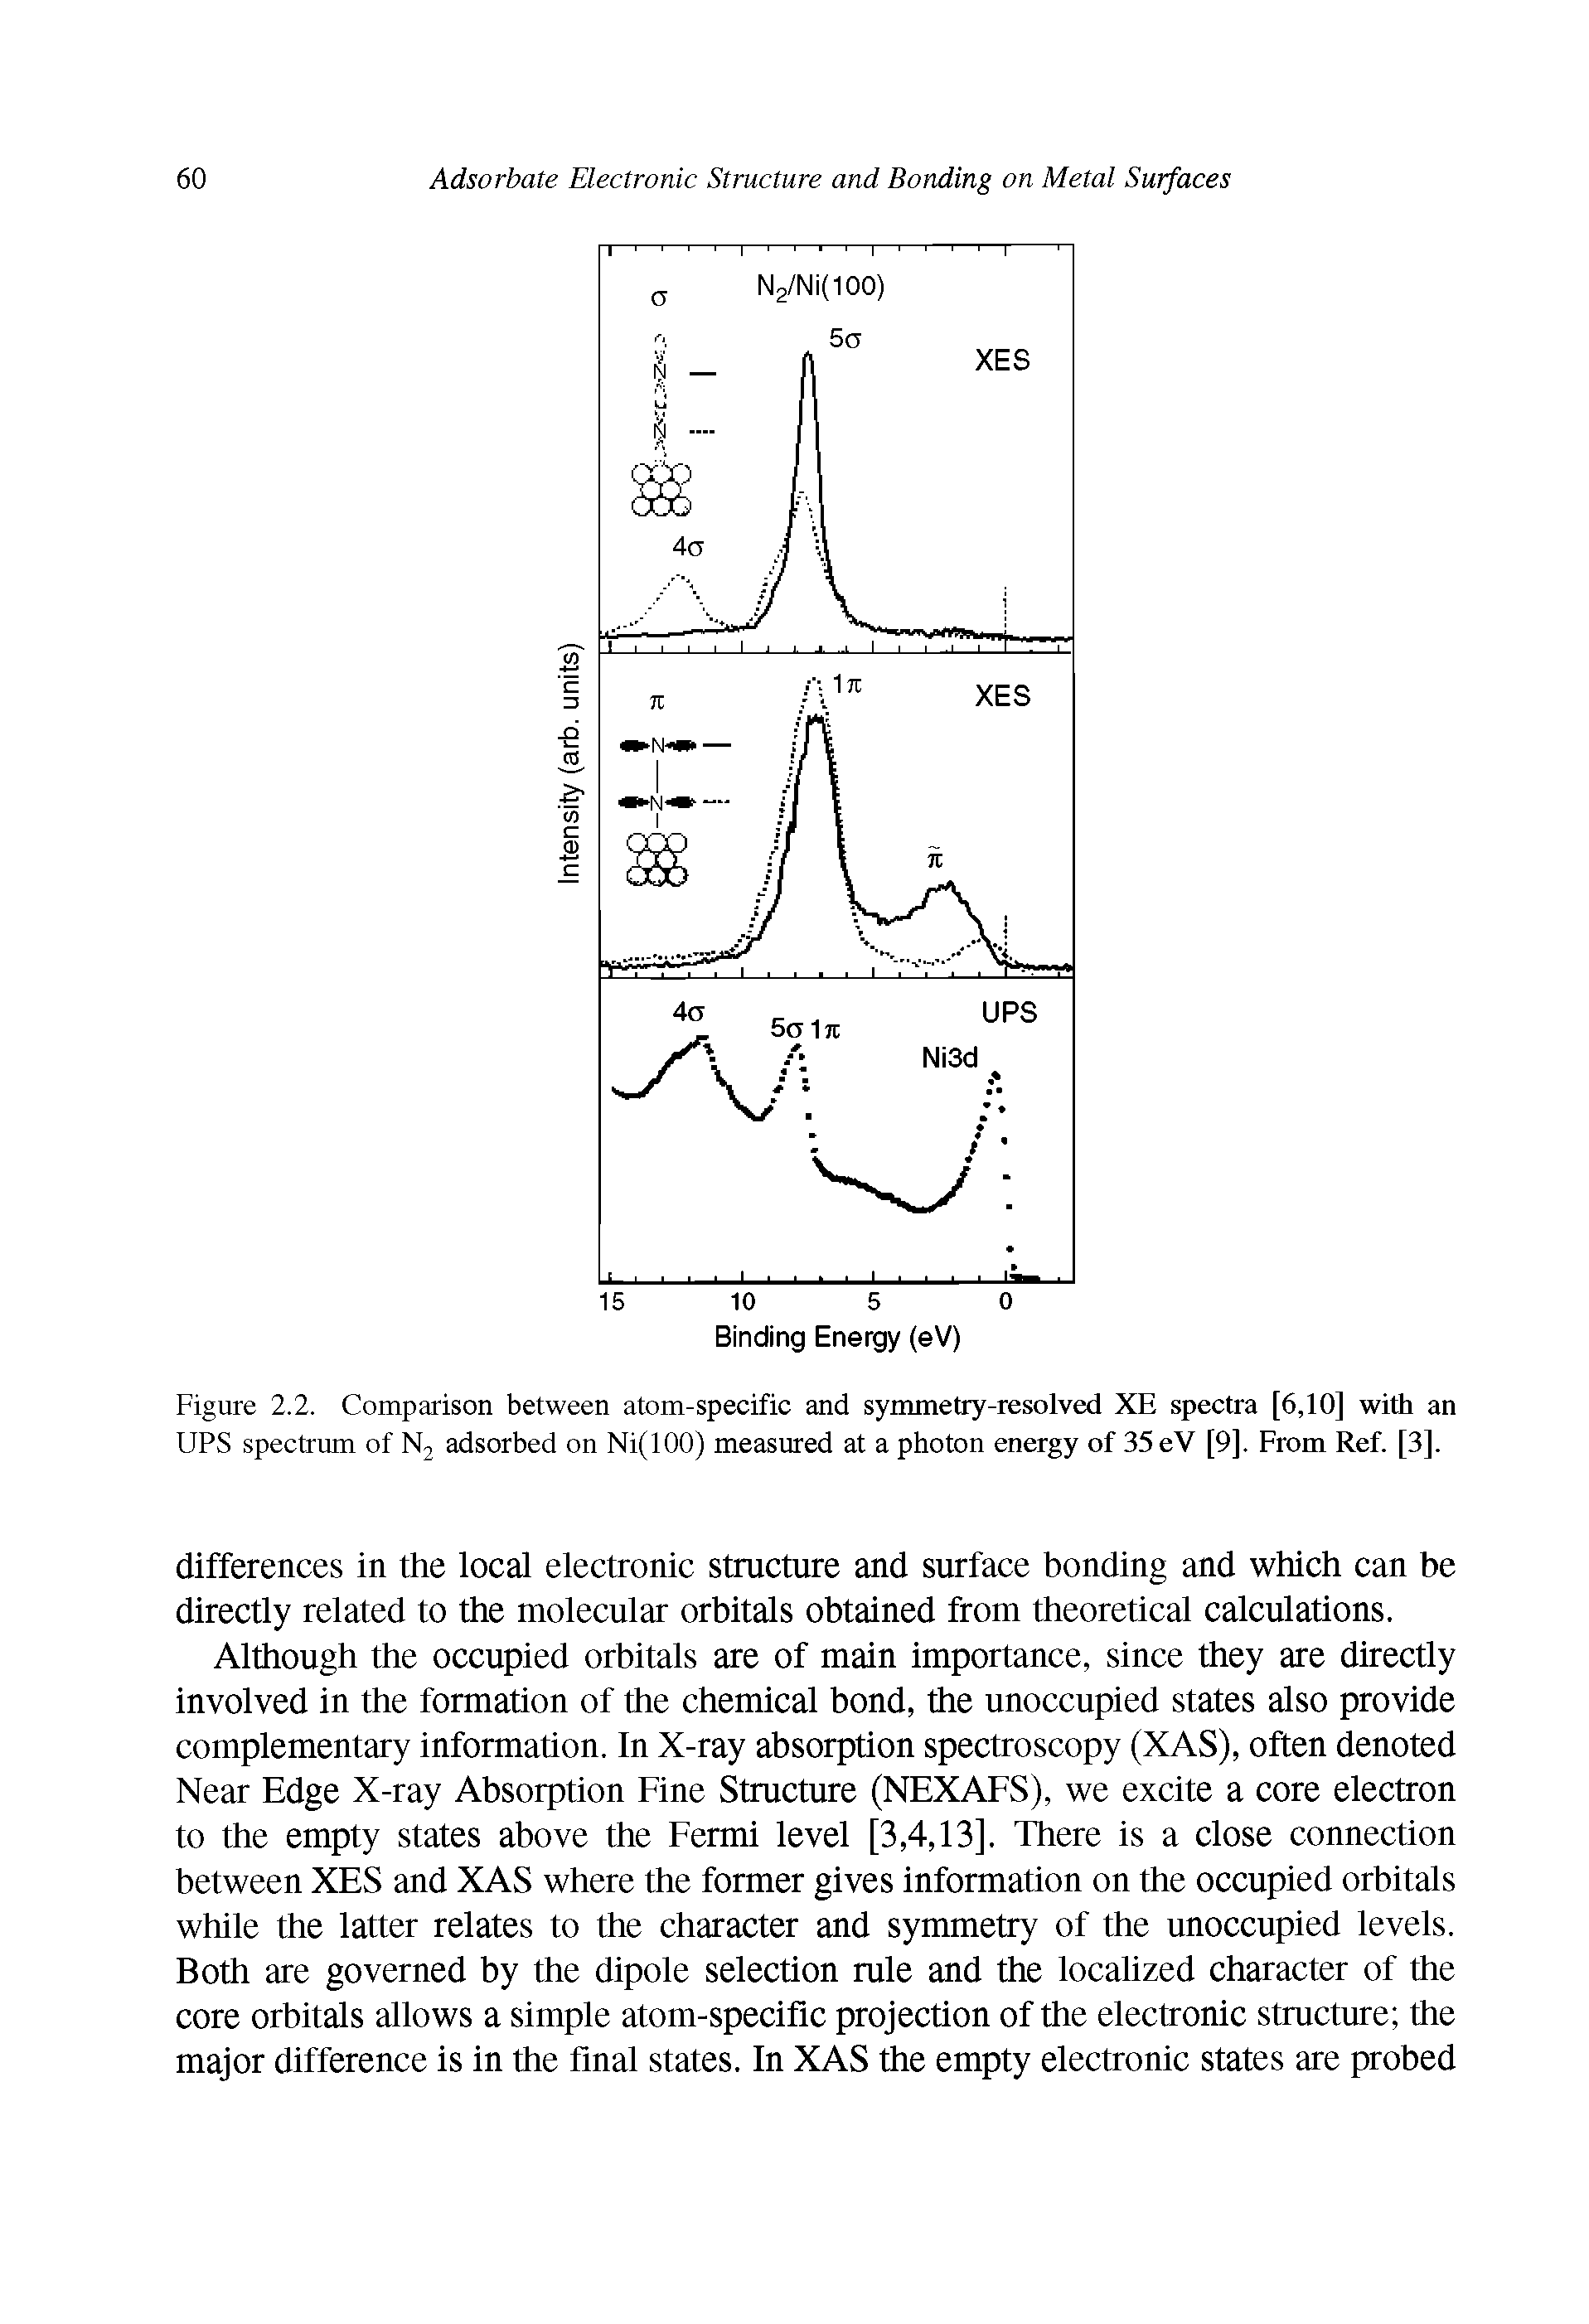 Figure 2.2. Comparison between atom-specific and symmetry-resolved XE spectra [6,10] with an UPS spectrum of N2 adsorbed on Ni(100) measured at a photon energy of 35 eV [9]. From Ref. [3].